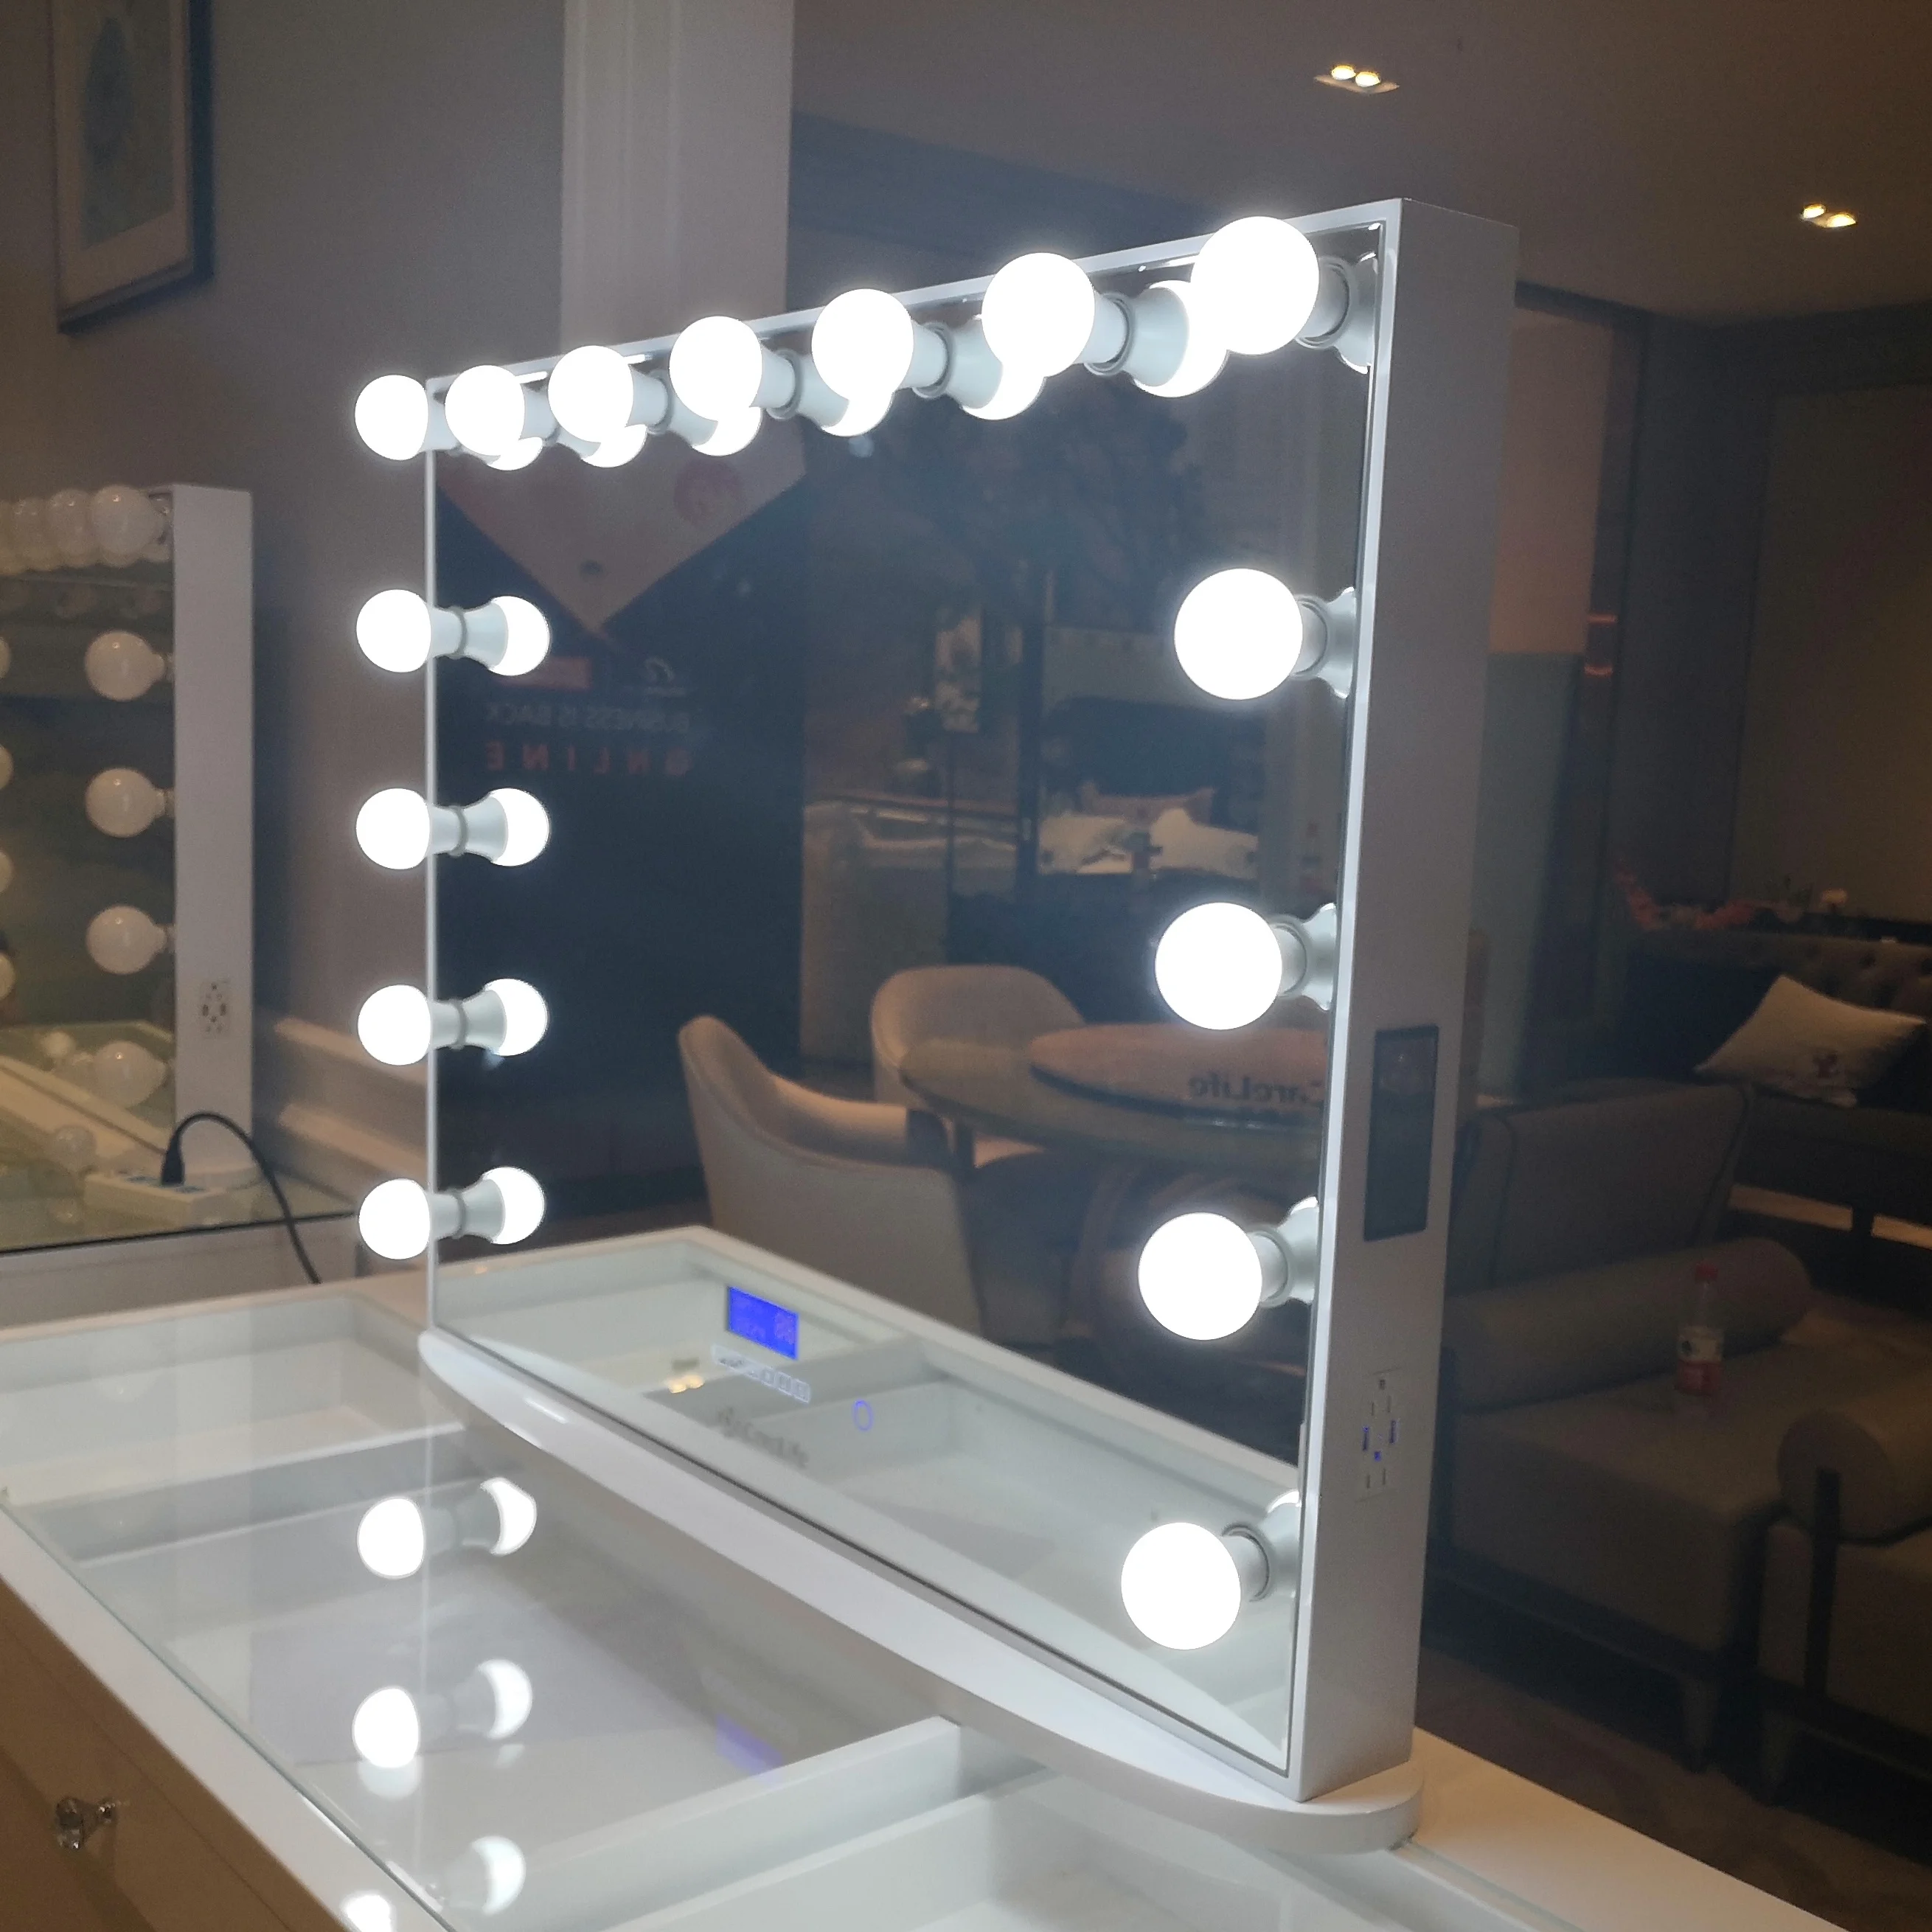 

Docarelife Frameless Light Dimmable Desktop Mirror Hollywood Style Makeup Vanity Mirror with 15 LED Bulbs Wireless Speaker, White